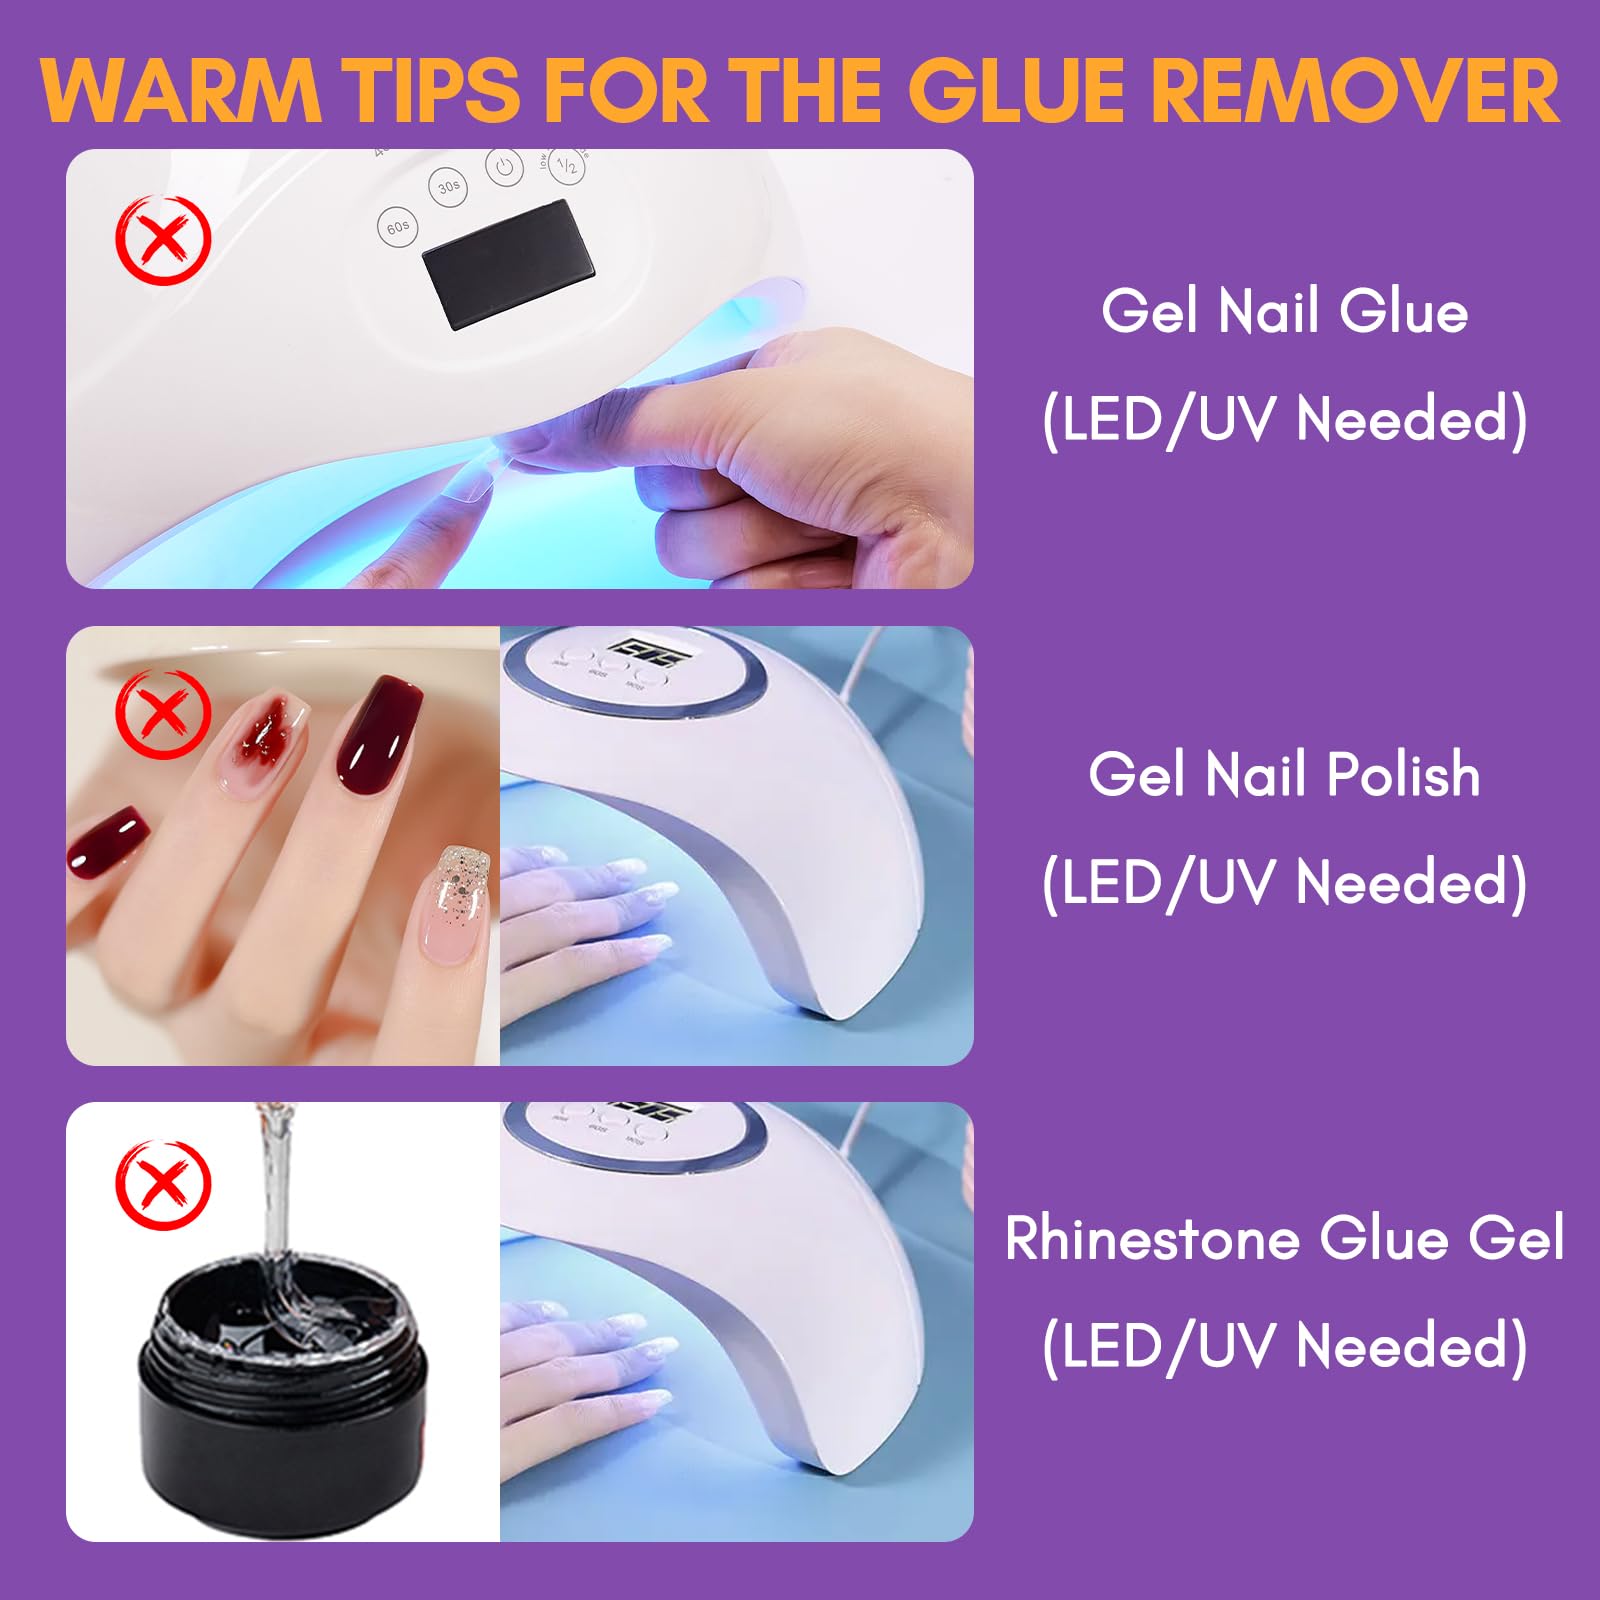 Nail Glue Remover Kit with Cuticle Oil